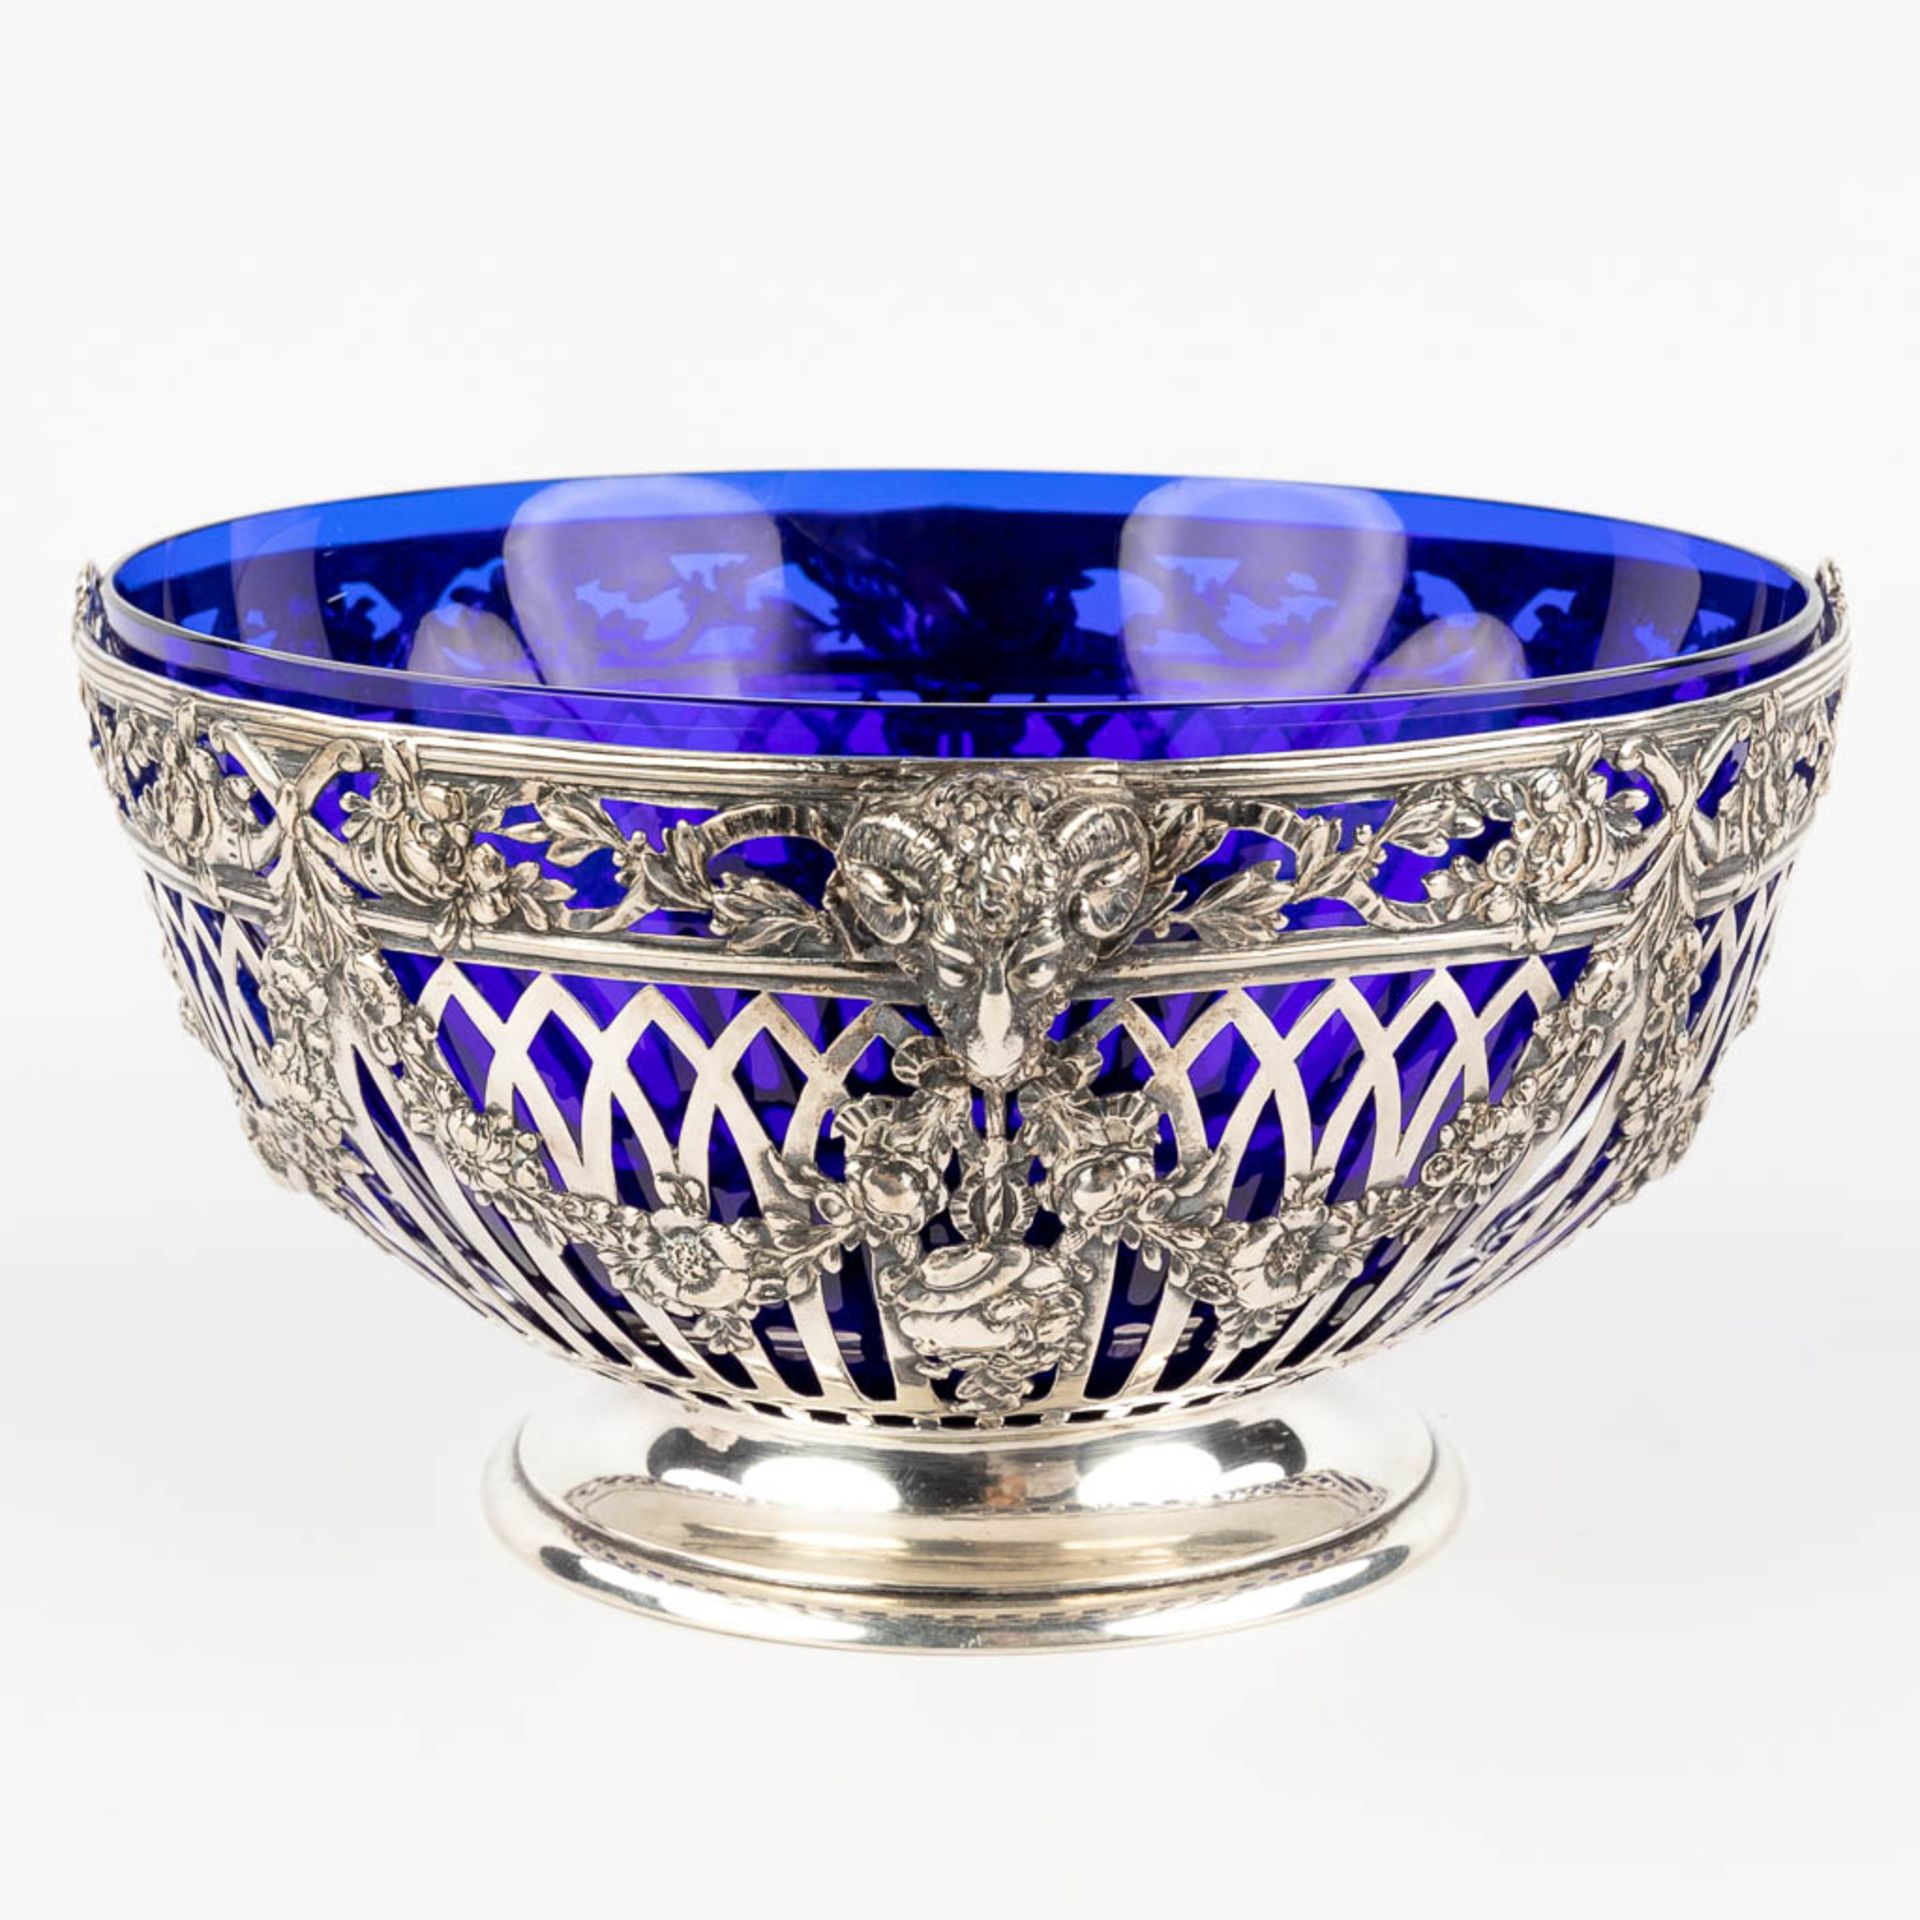 A bowl, silver and blue glass, decor of ram's heads and garlands. Germany. 684g. (D:25 x W:27 x H:13 - Image 6 of 14